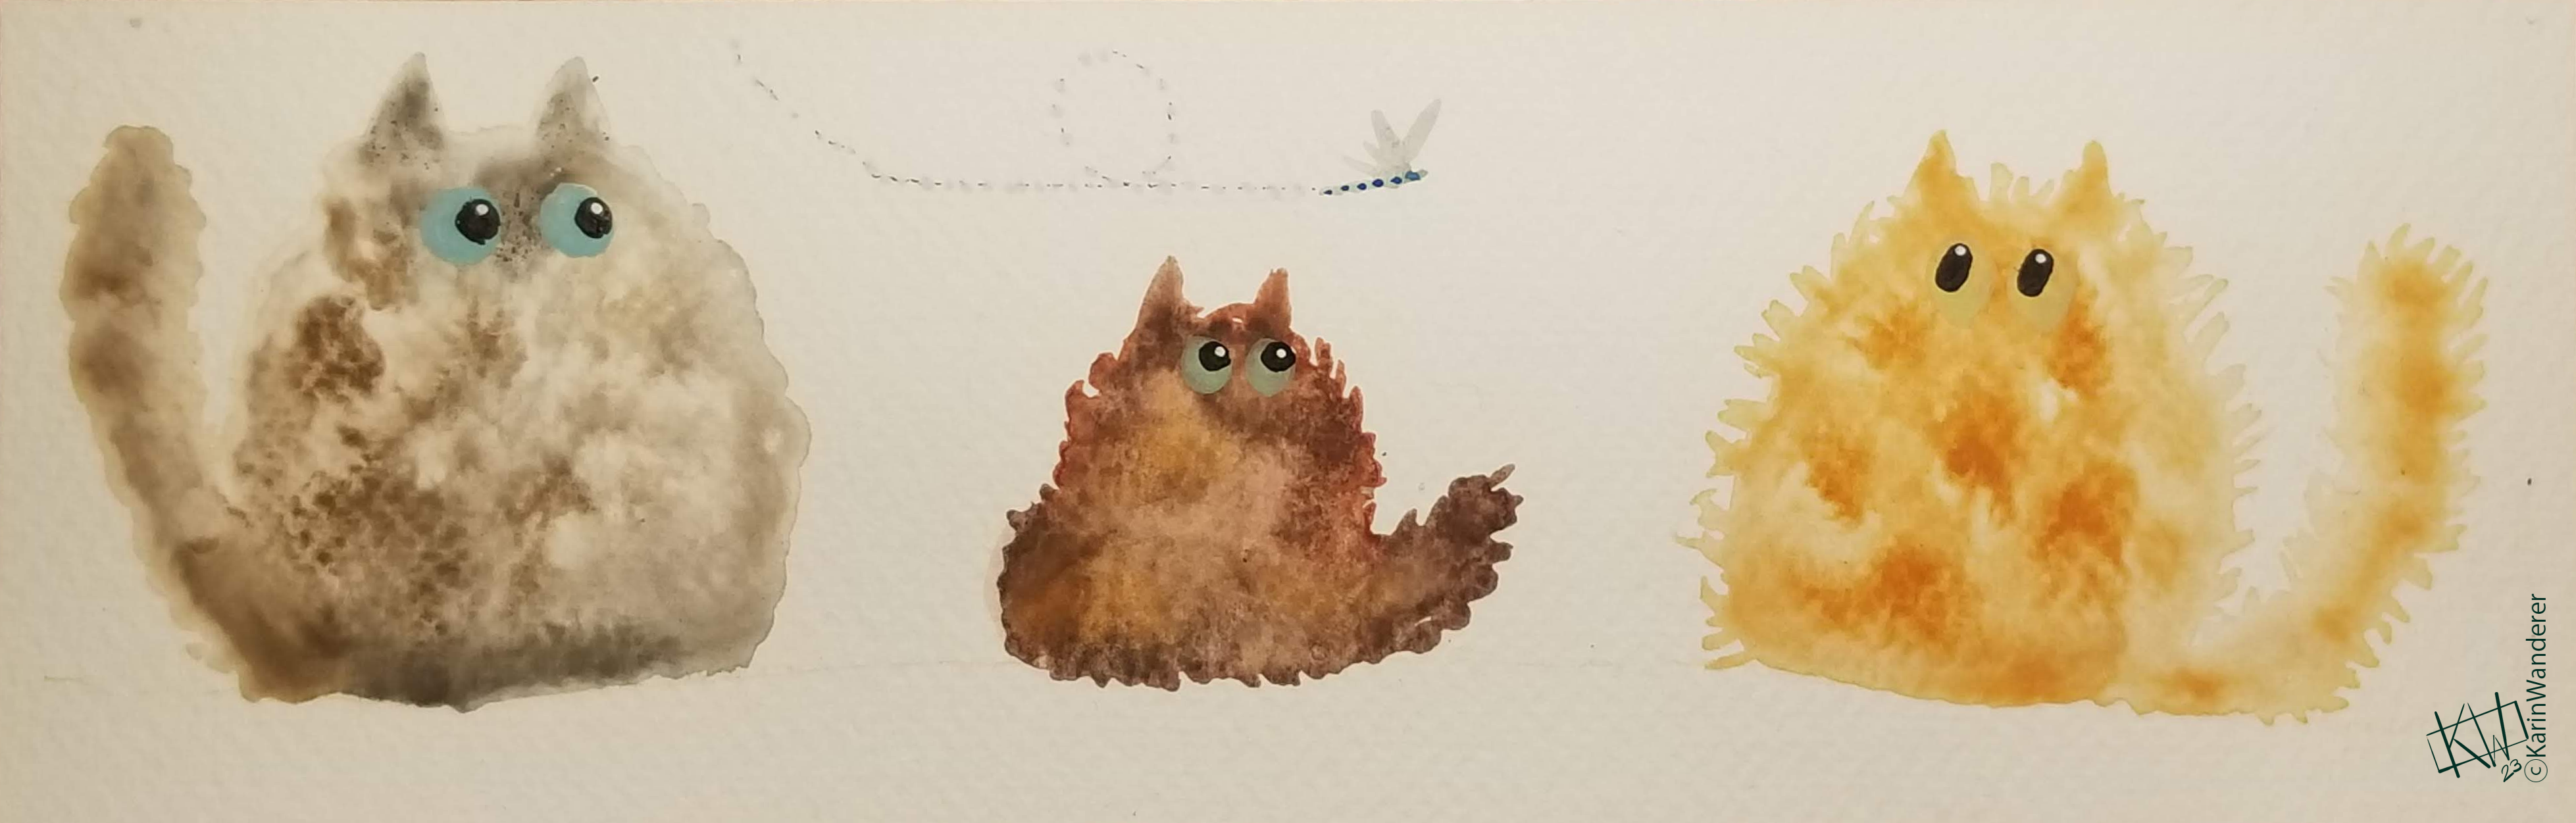 Three watercolor cats - grey, brown, & orange - watch a dragonfly zoom overhead with wide eyes.